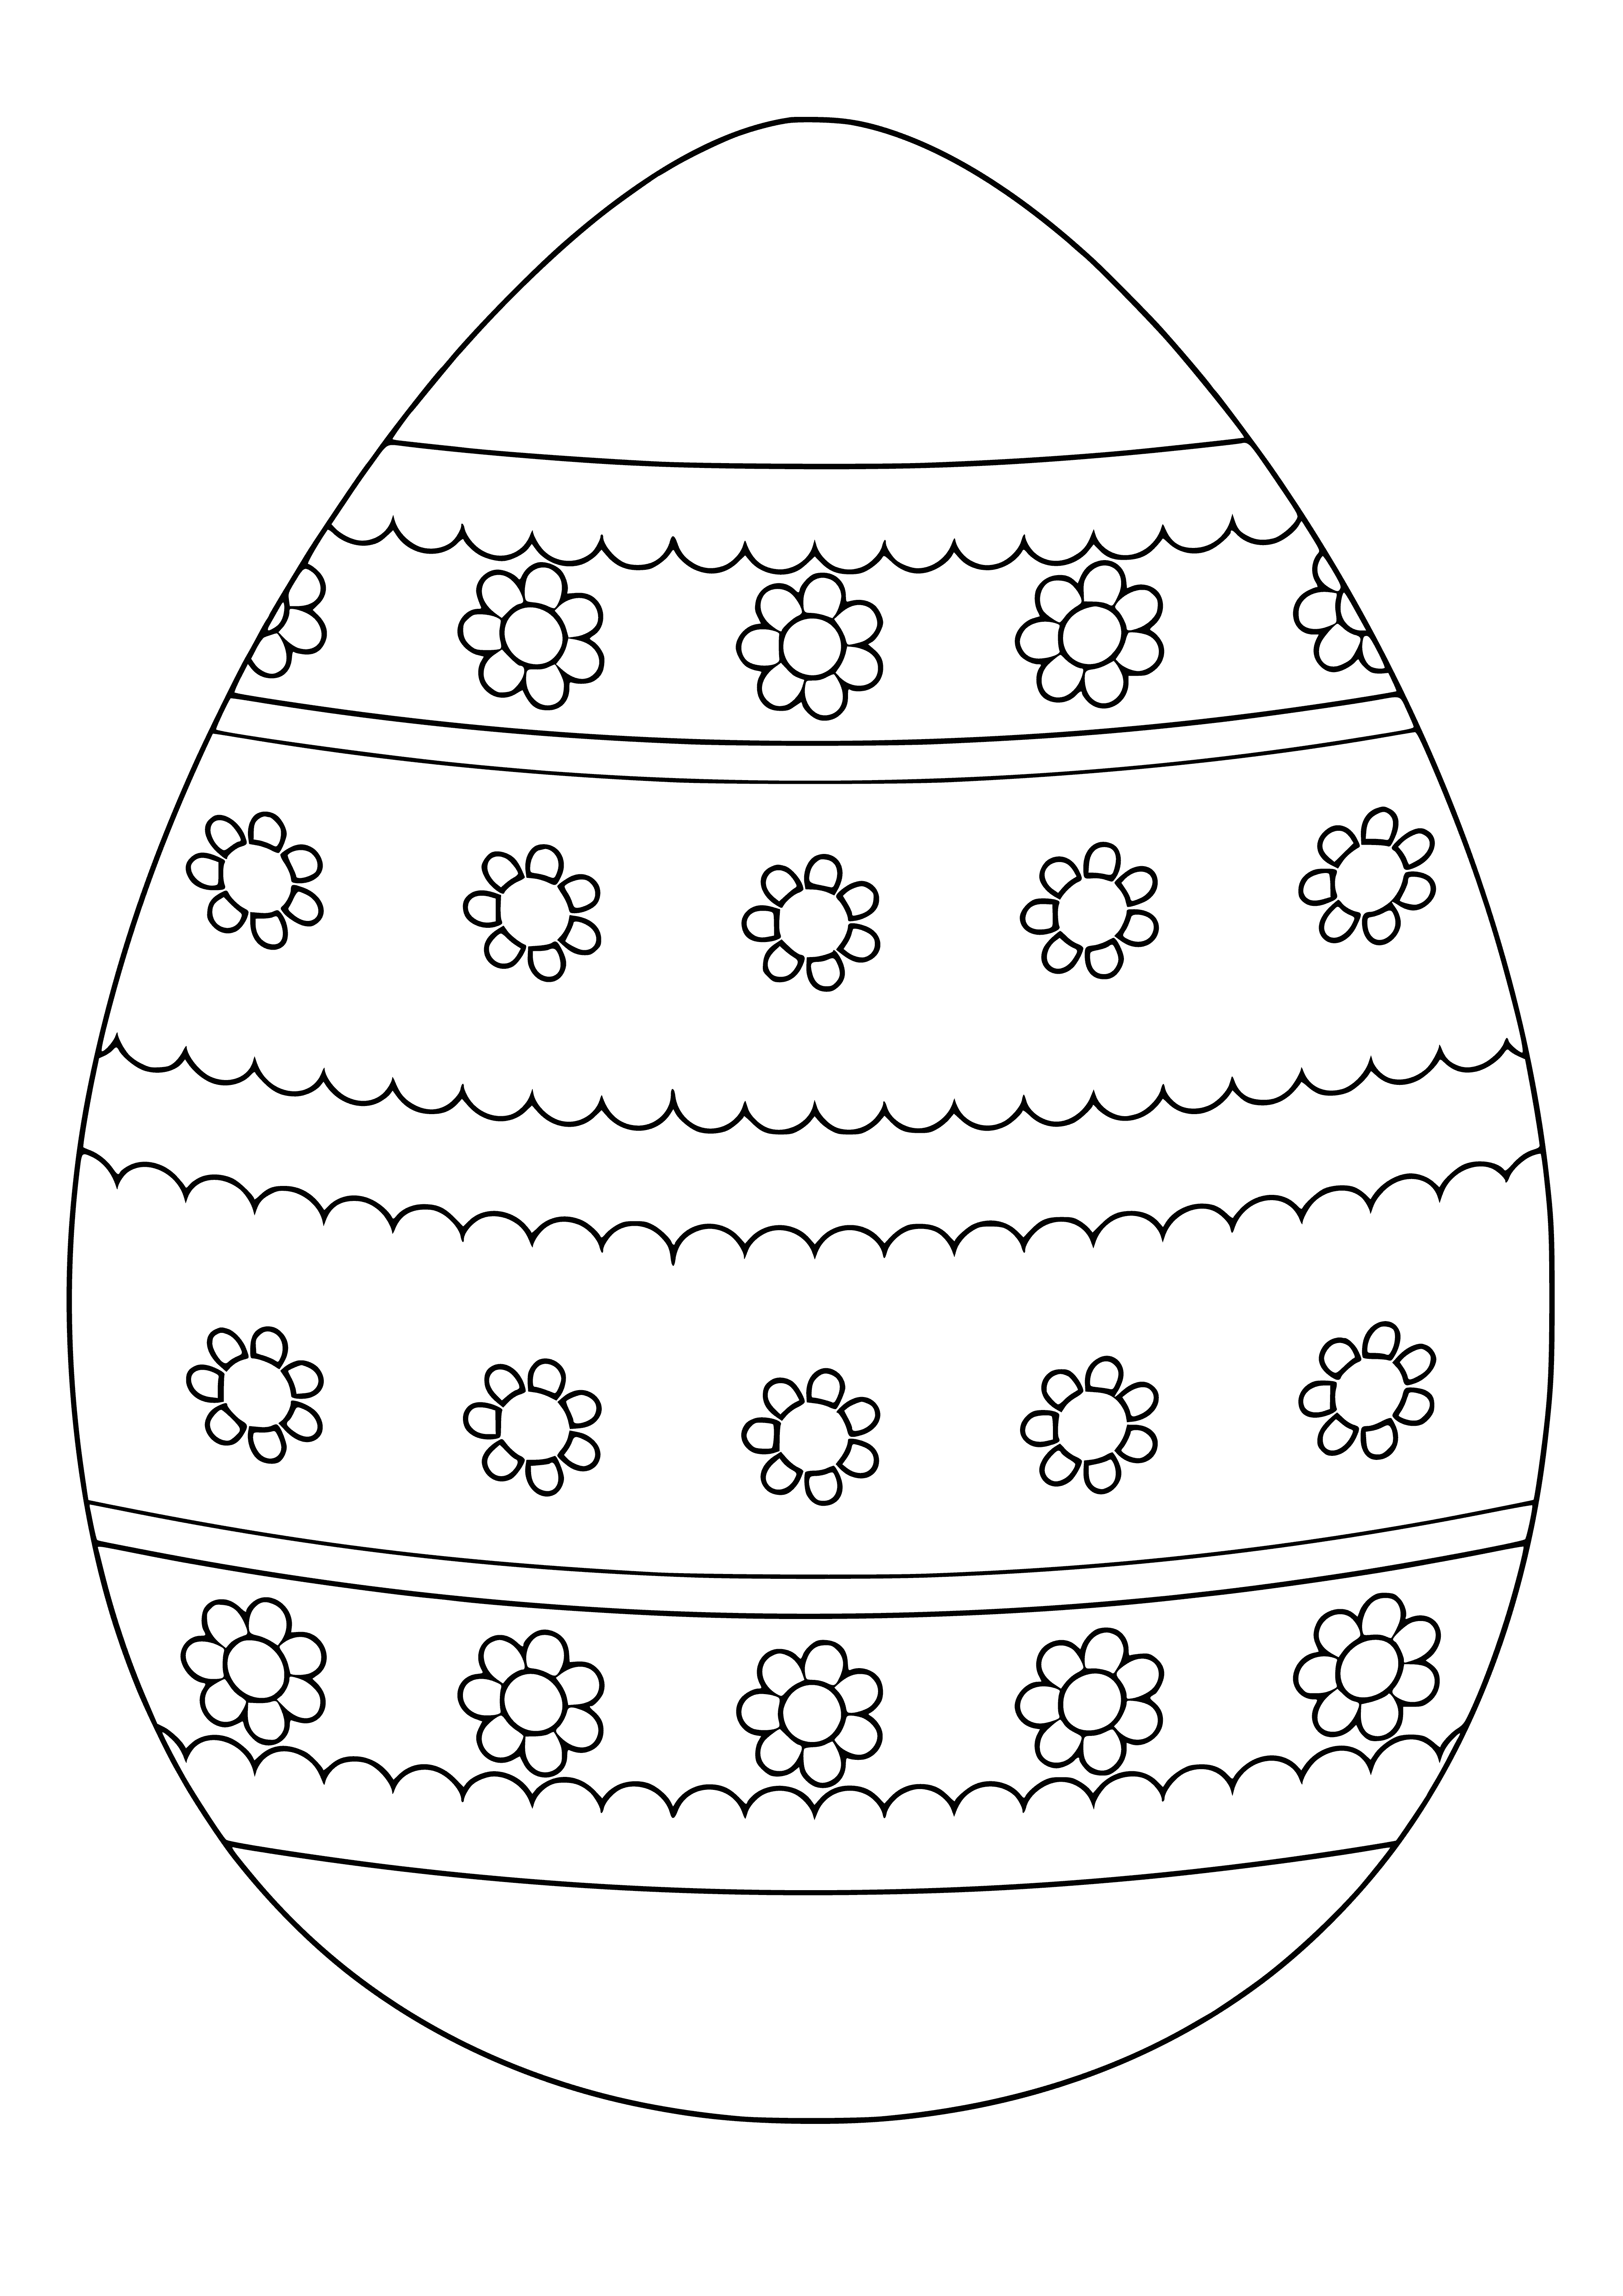 coloring page: Gift colorful Easter eggs: a traditional holiday symbol of renewal and hope.